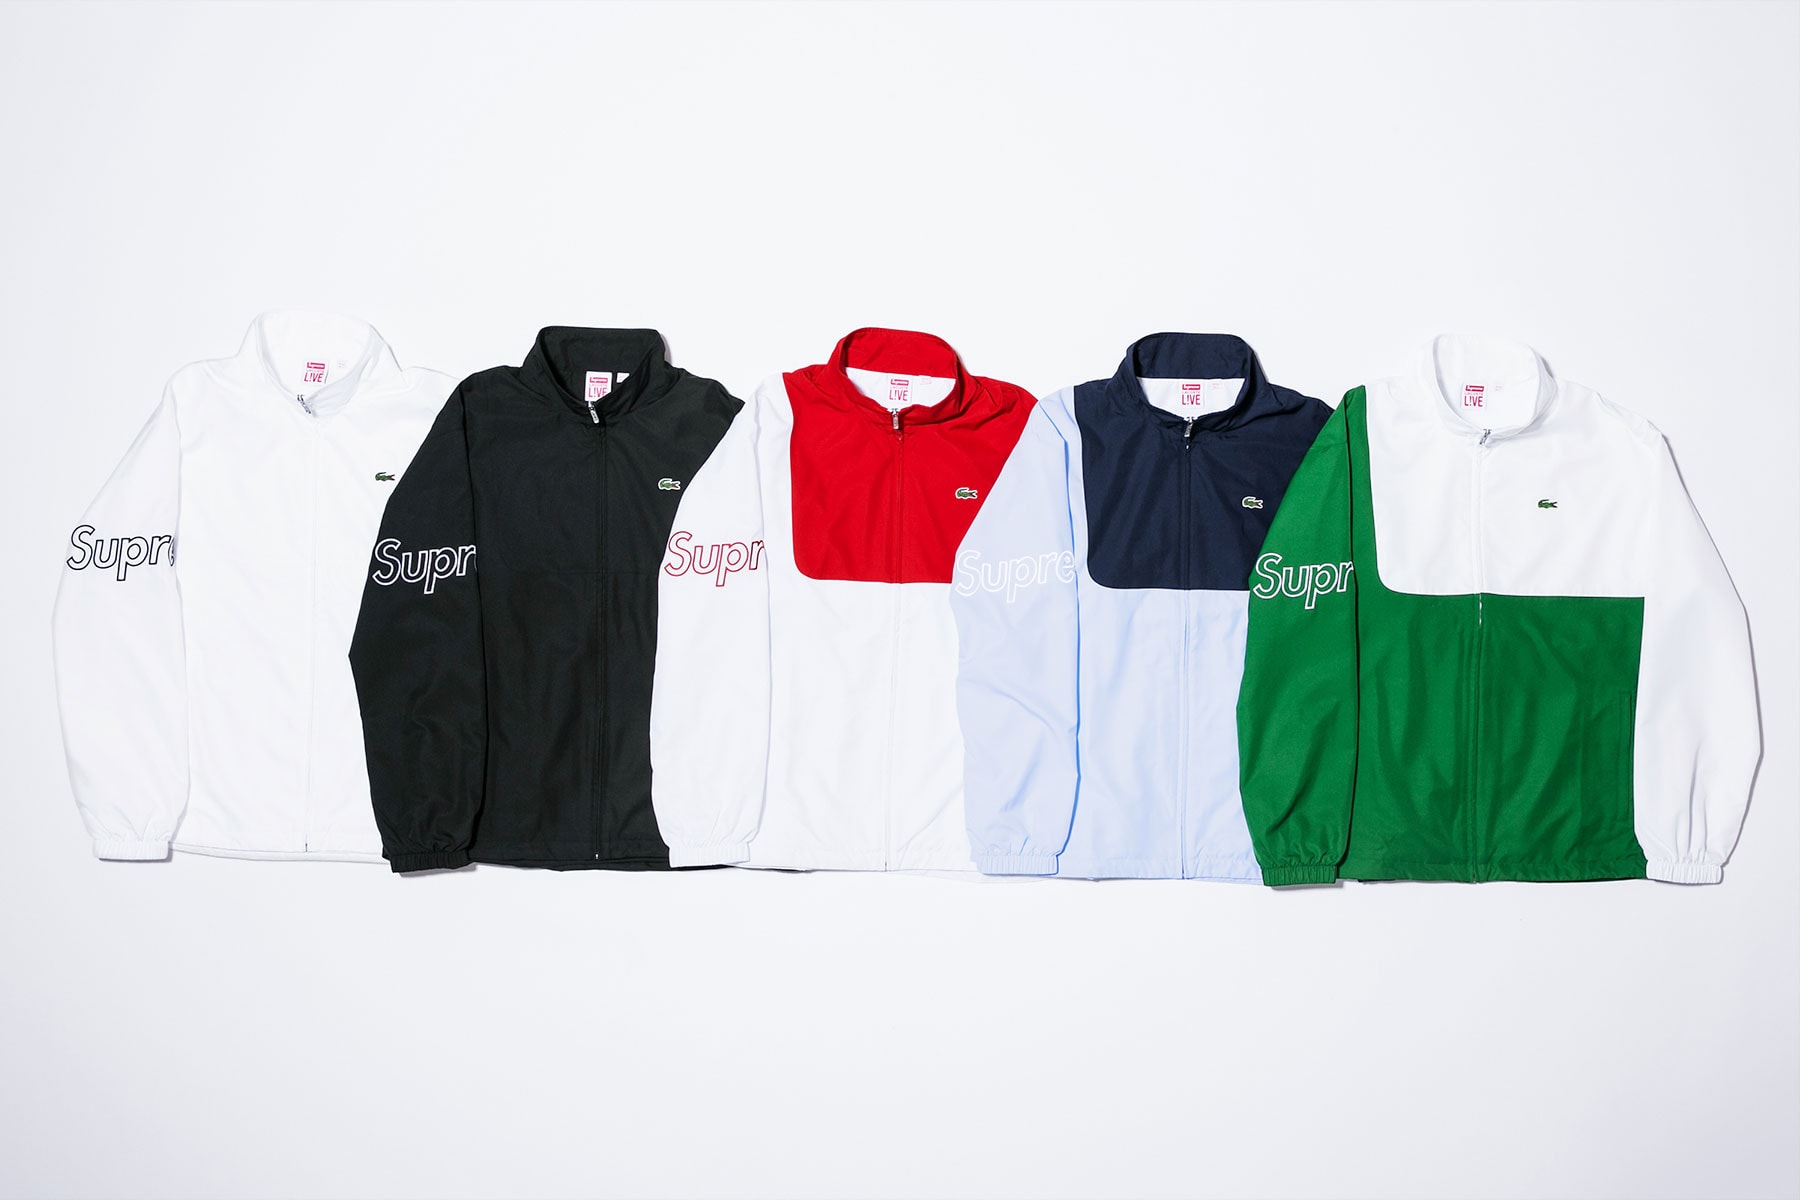 Lacoste x Supreme 2017 Spring/Summer Collection